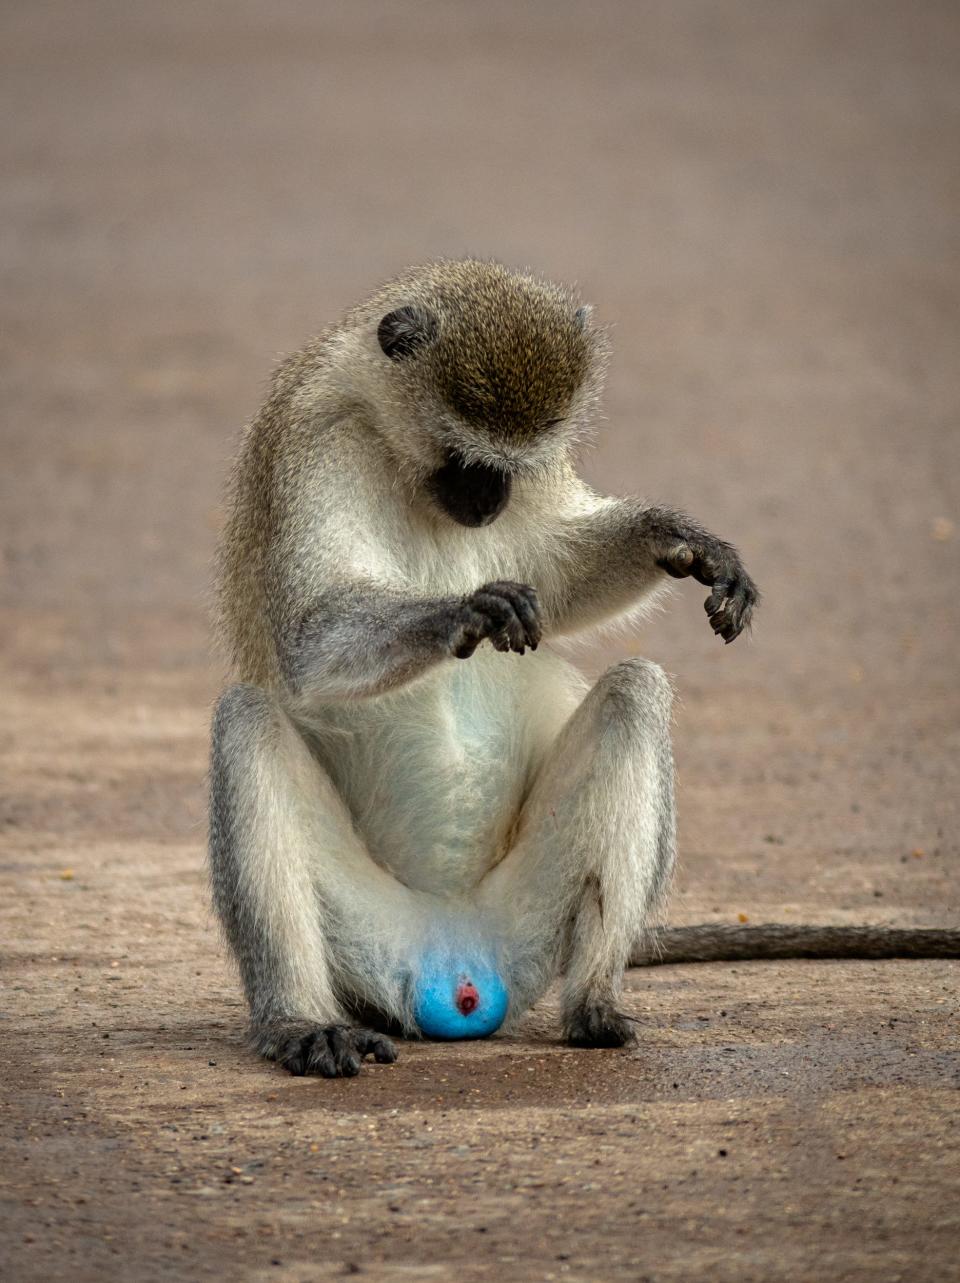 A monkey looks at its groin.